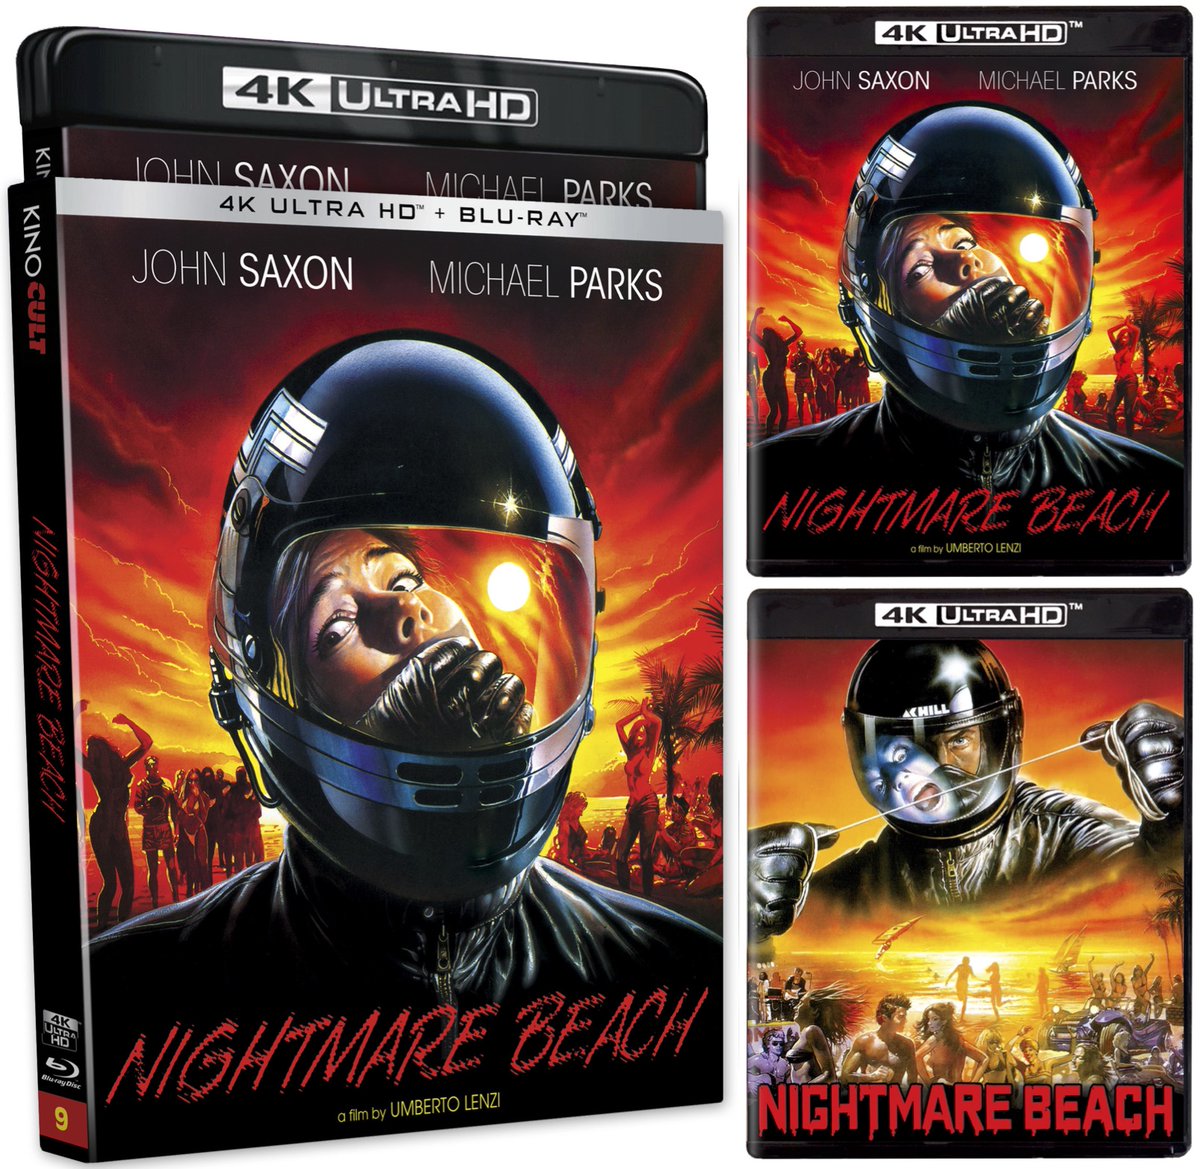 Coming July 16th on 4KUHD! kinolorber.com/product/nightm… Kino Cult #9 Nightmare Beach (1989) DISC 1 (4KUHD): • 2019 UHD SDR Master by StudioCanal – From a 4K Scan of the 35mm Original Camera Negative • Audio Commentary by Film Historian Samm Deighan • 5.1 Surround and Lossless…